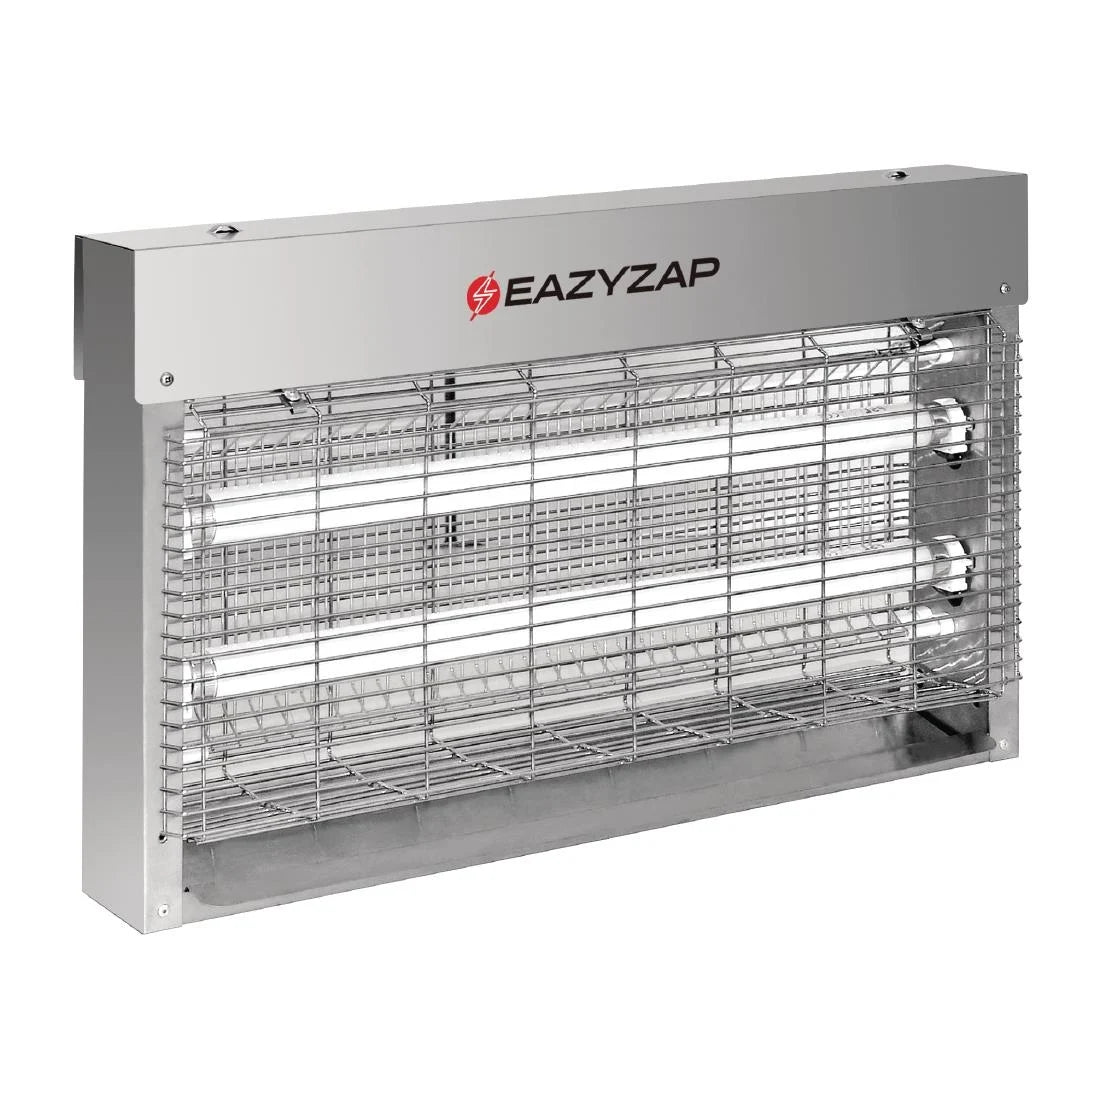 Eazyzap Energy Efficient Stainless Steel LED Fly Killer 100m².Product Ref:00736.Model:FP984. 🚚 3-5 Days Delivery